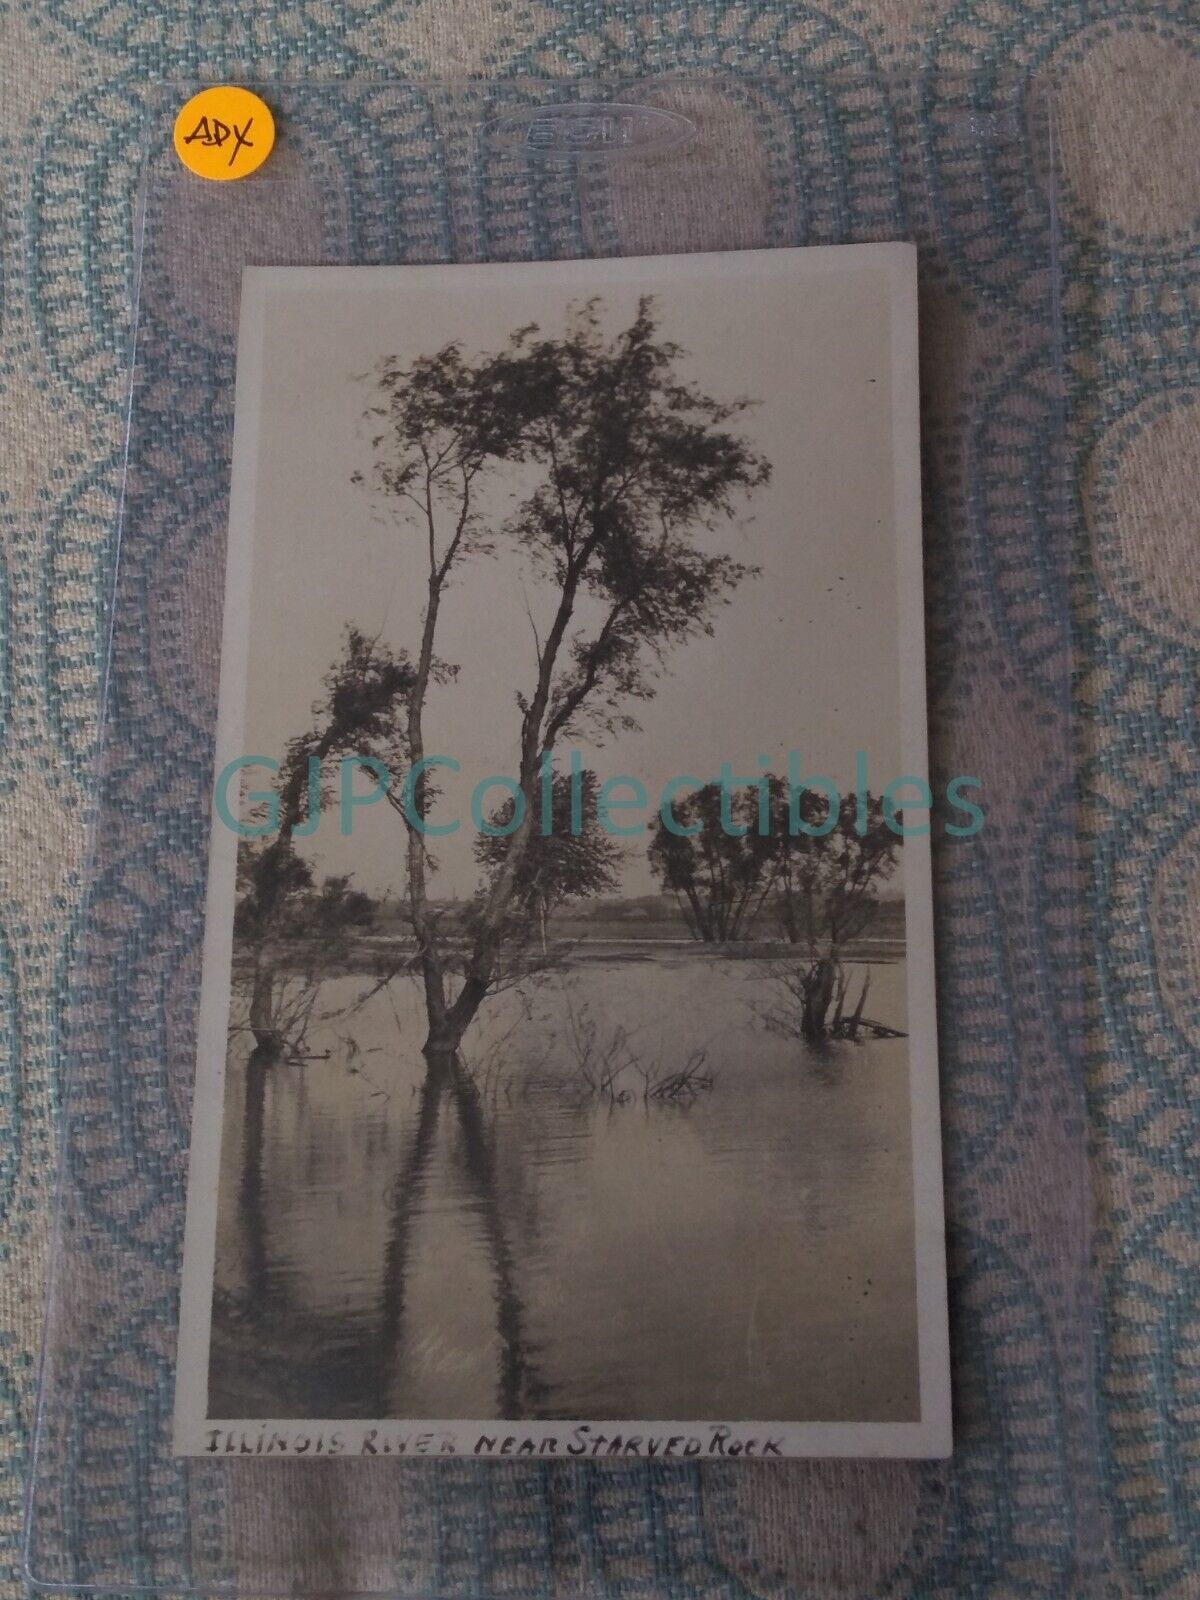 ADX VINTAGE PHOTOGRAPH Spencer Lionel Adams ILLINOIS RIVER NEAR STARVED ROCK